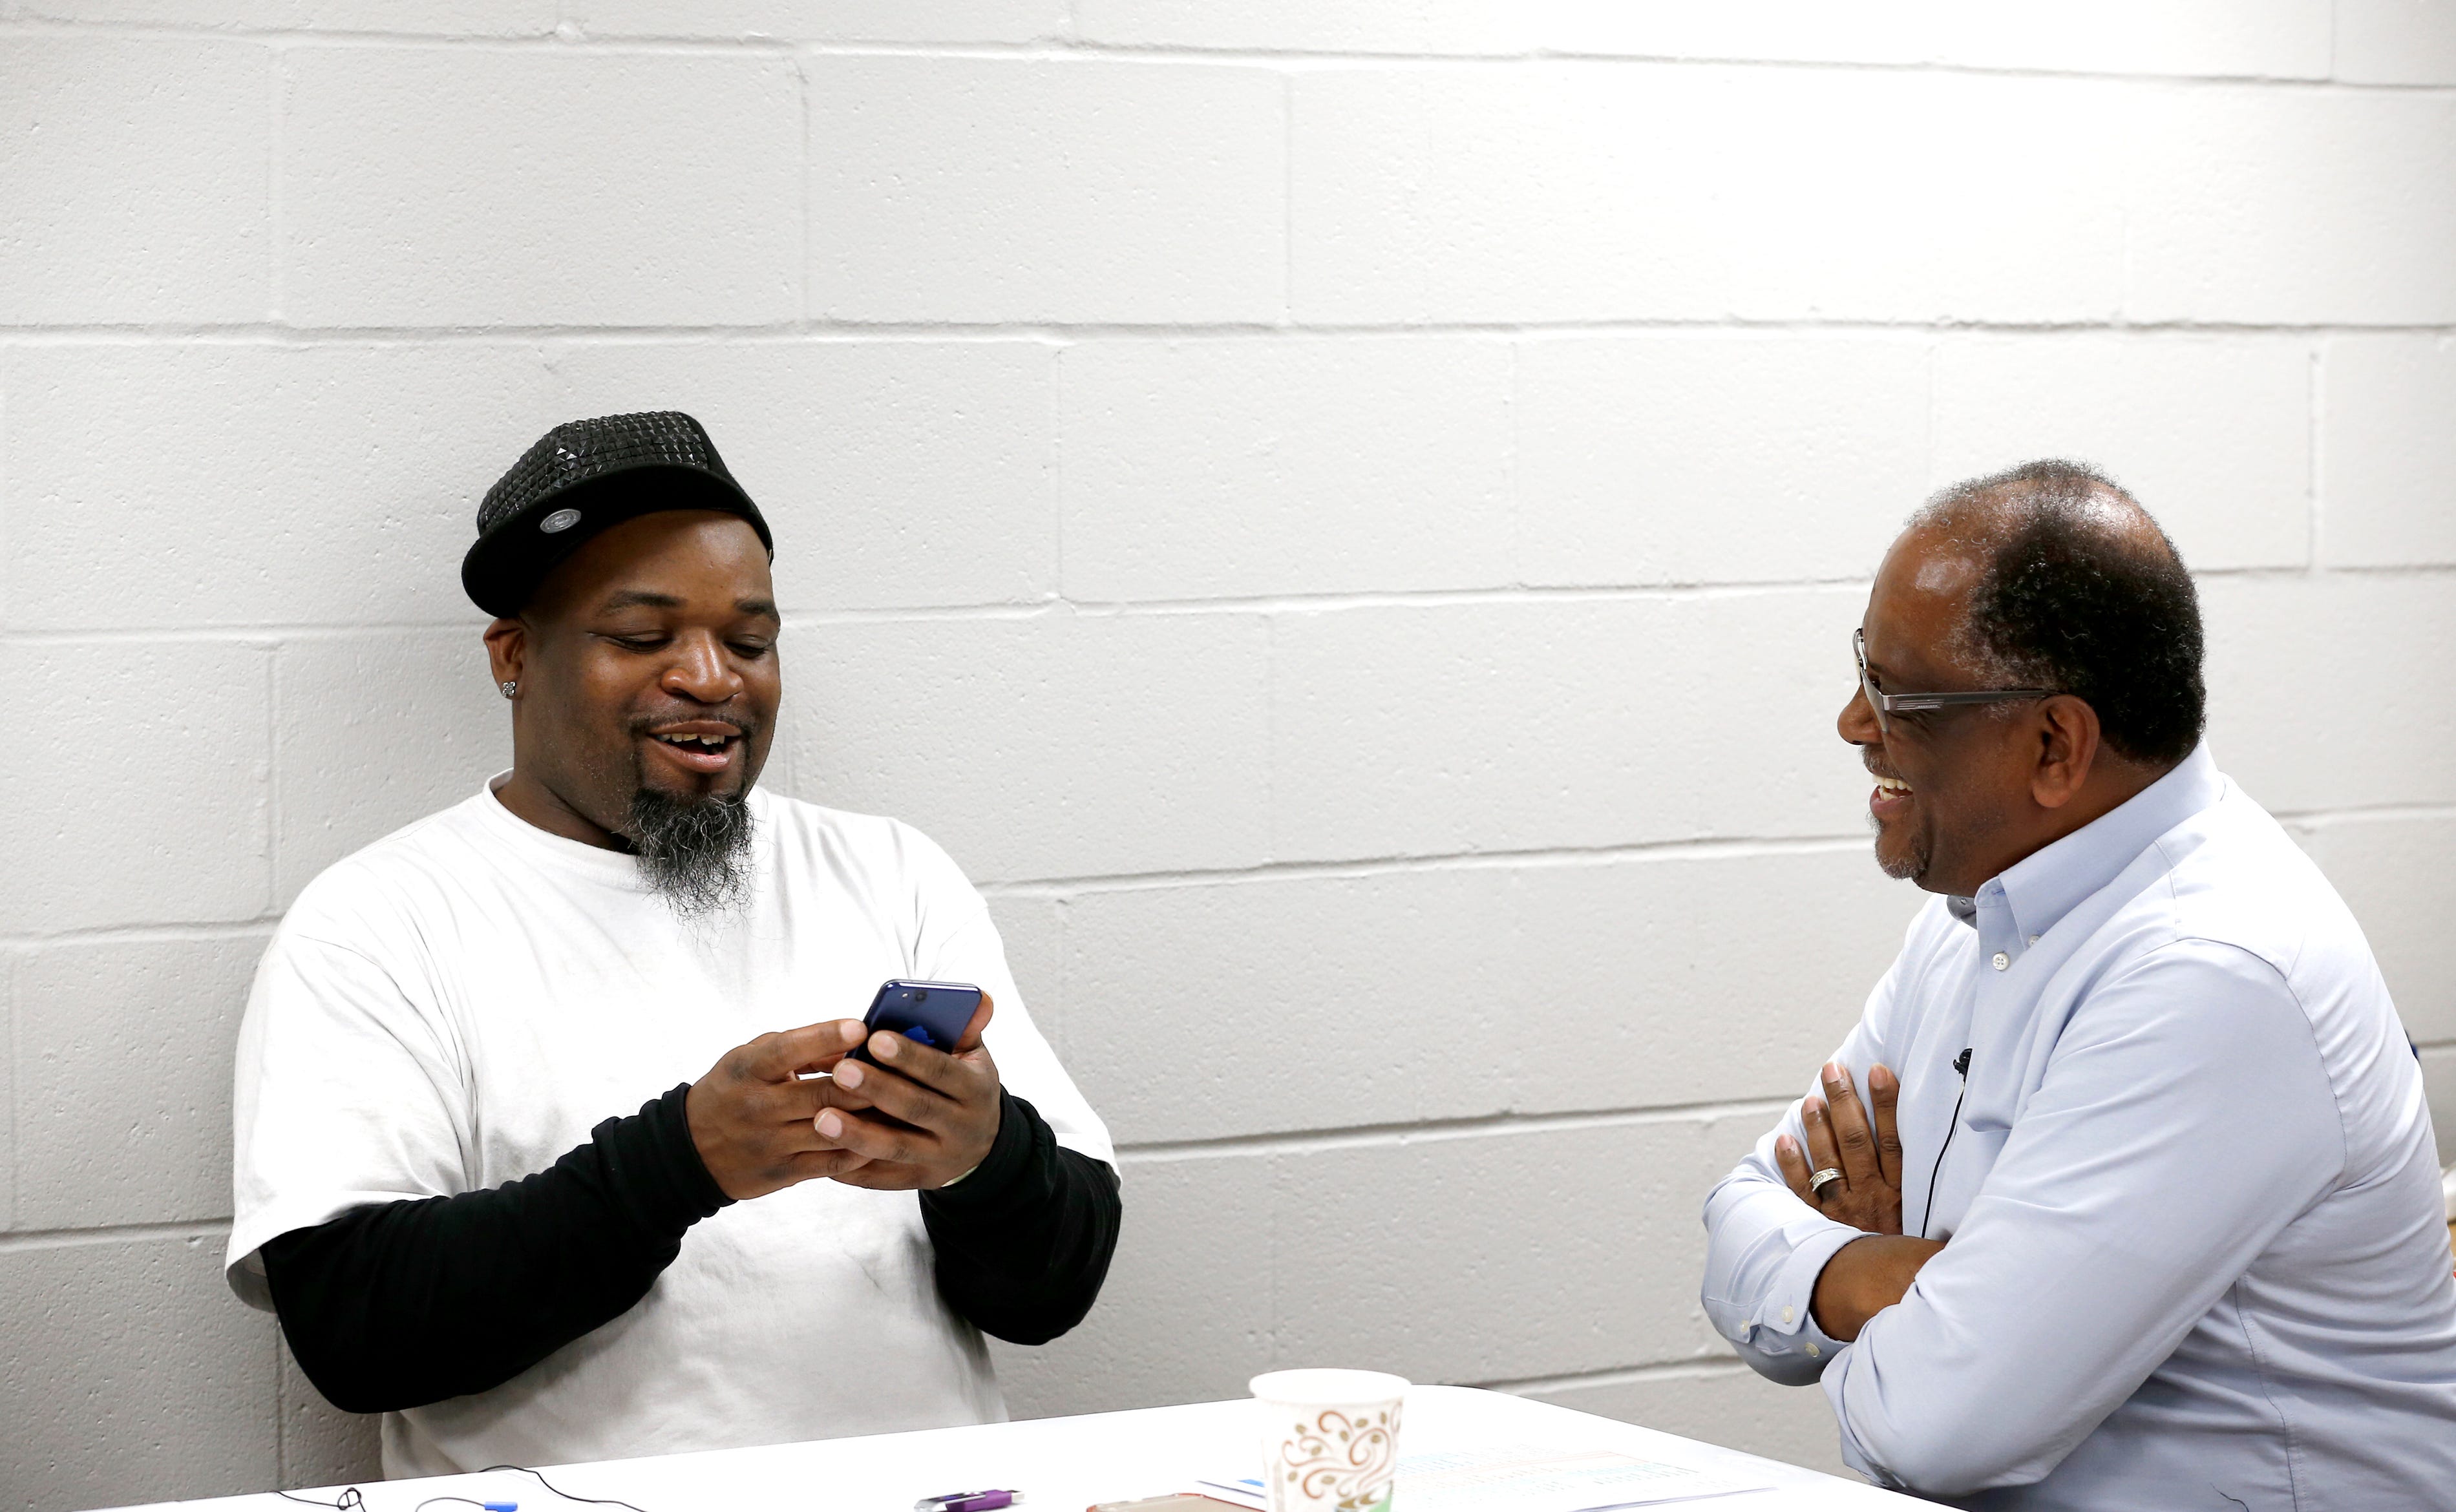 Michael Bailey, 65, right, career counselor, talks with Antoine Delon Durham, 37,  at the resource center of the Robert "Sonny" Hill Community Center in Middletown. Durham is rushing to fill out paperwork and arrange a ride so he can make his new job official before someone else takes it.